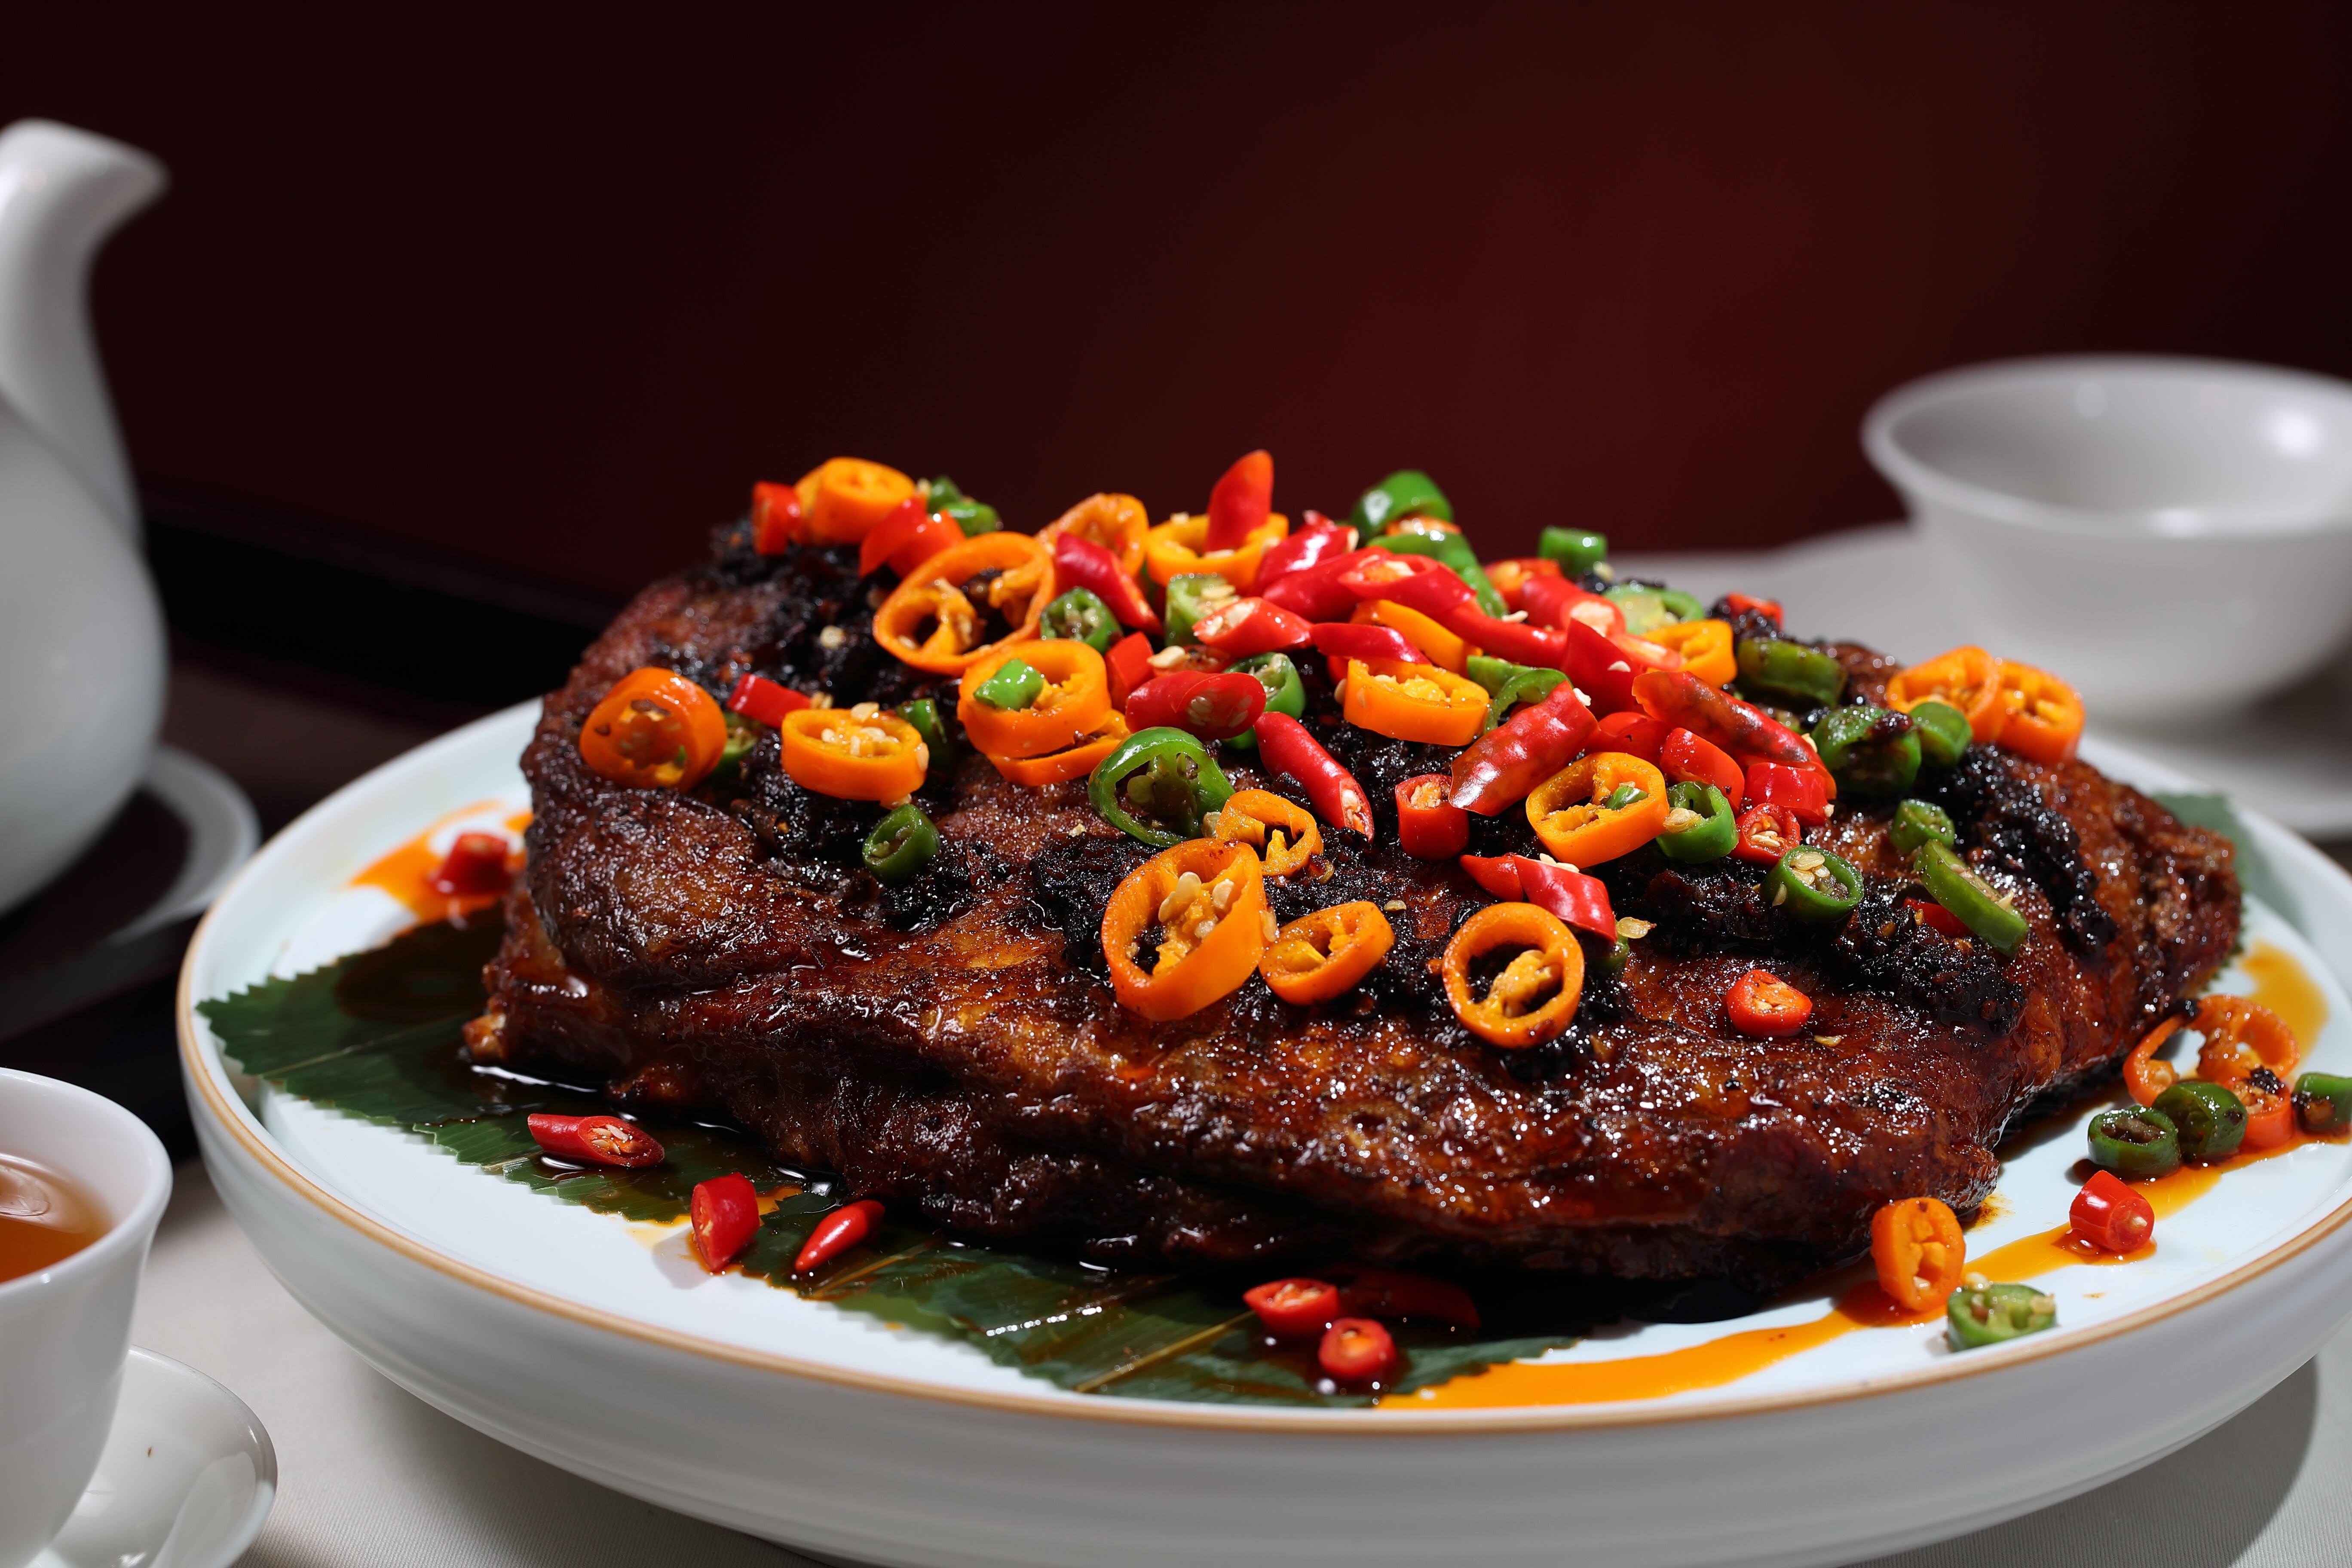 Fried Hulunbuir mutton spare ribs with home-made Sichuan chilli sauce at Dong Lai Shun. Photo: Alex Chan